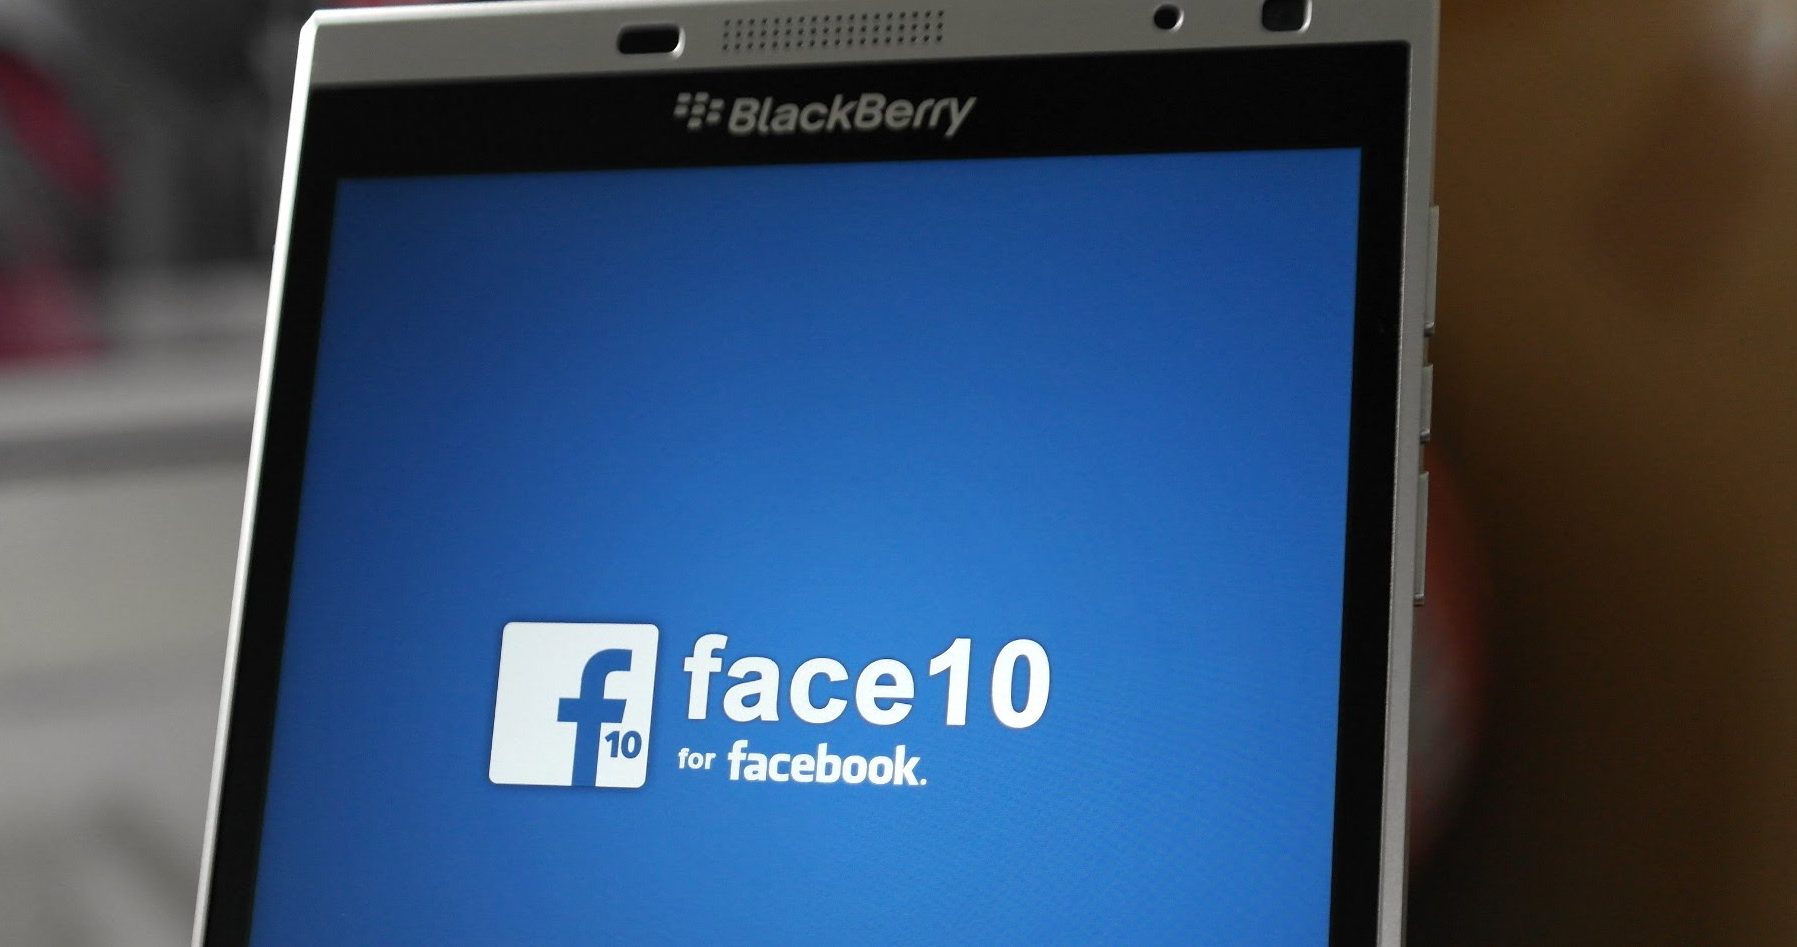 Why Blackberry Sued By Facebook?